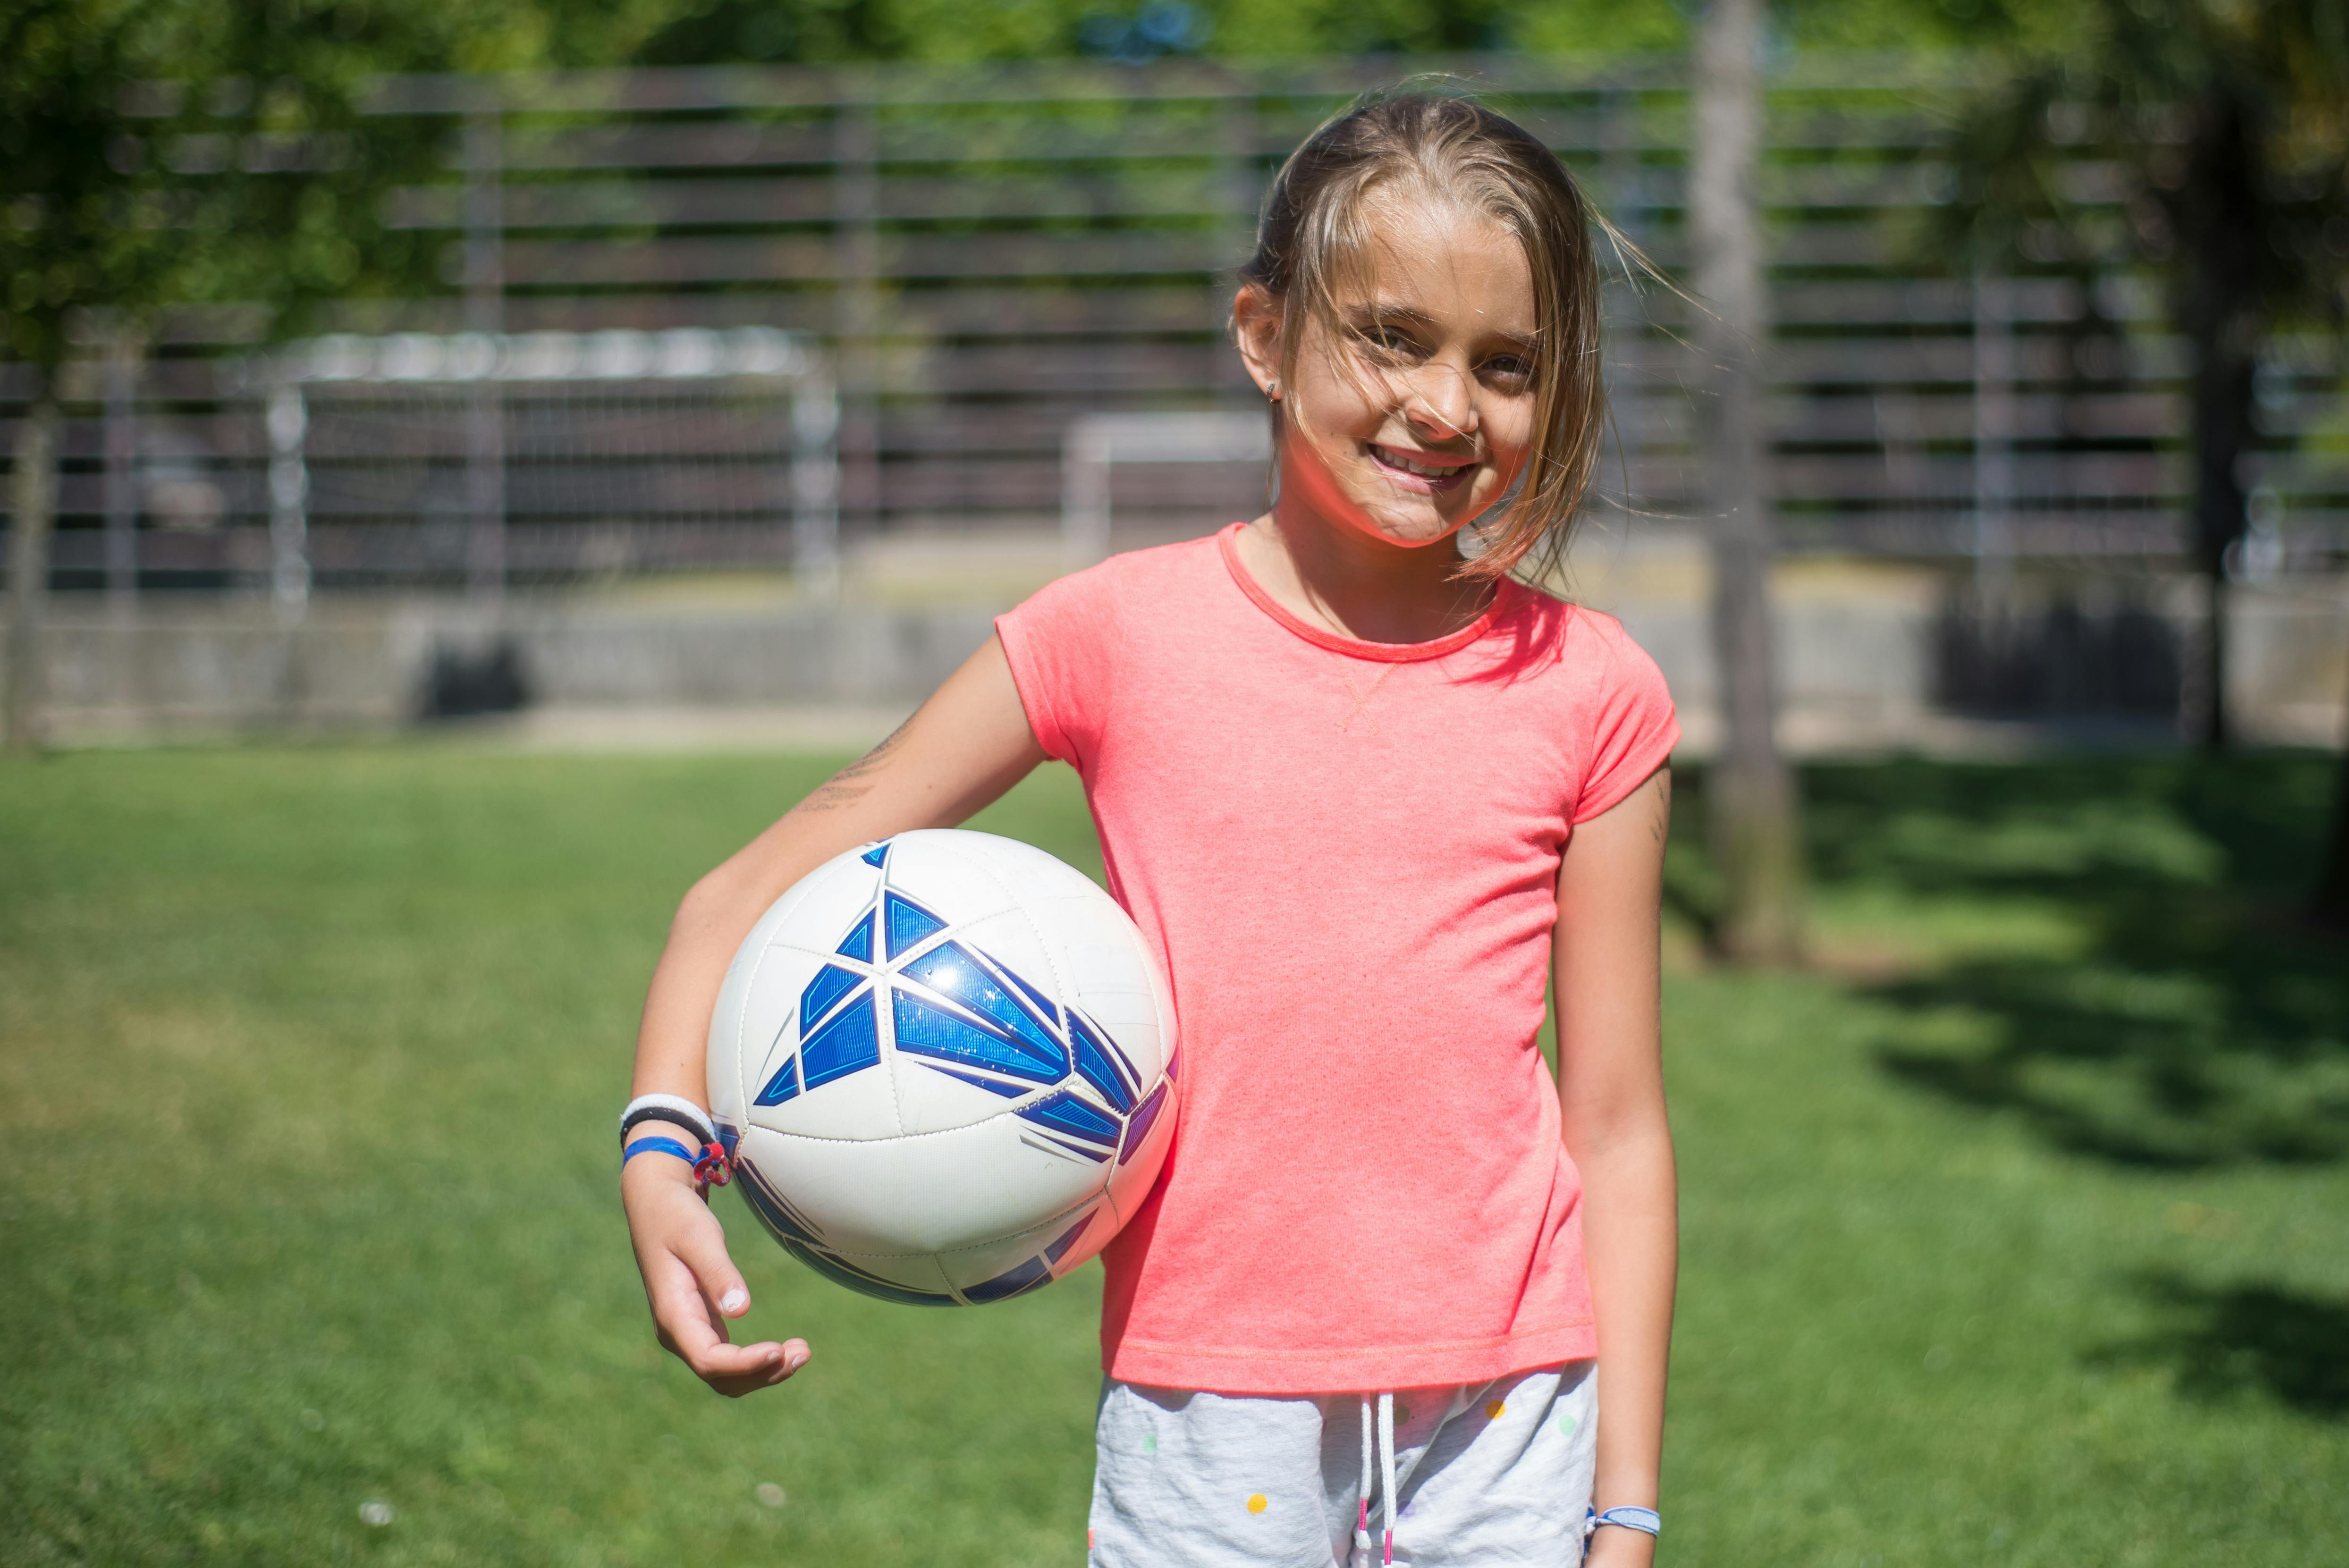 a young girl holding ball